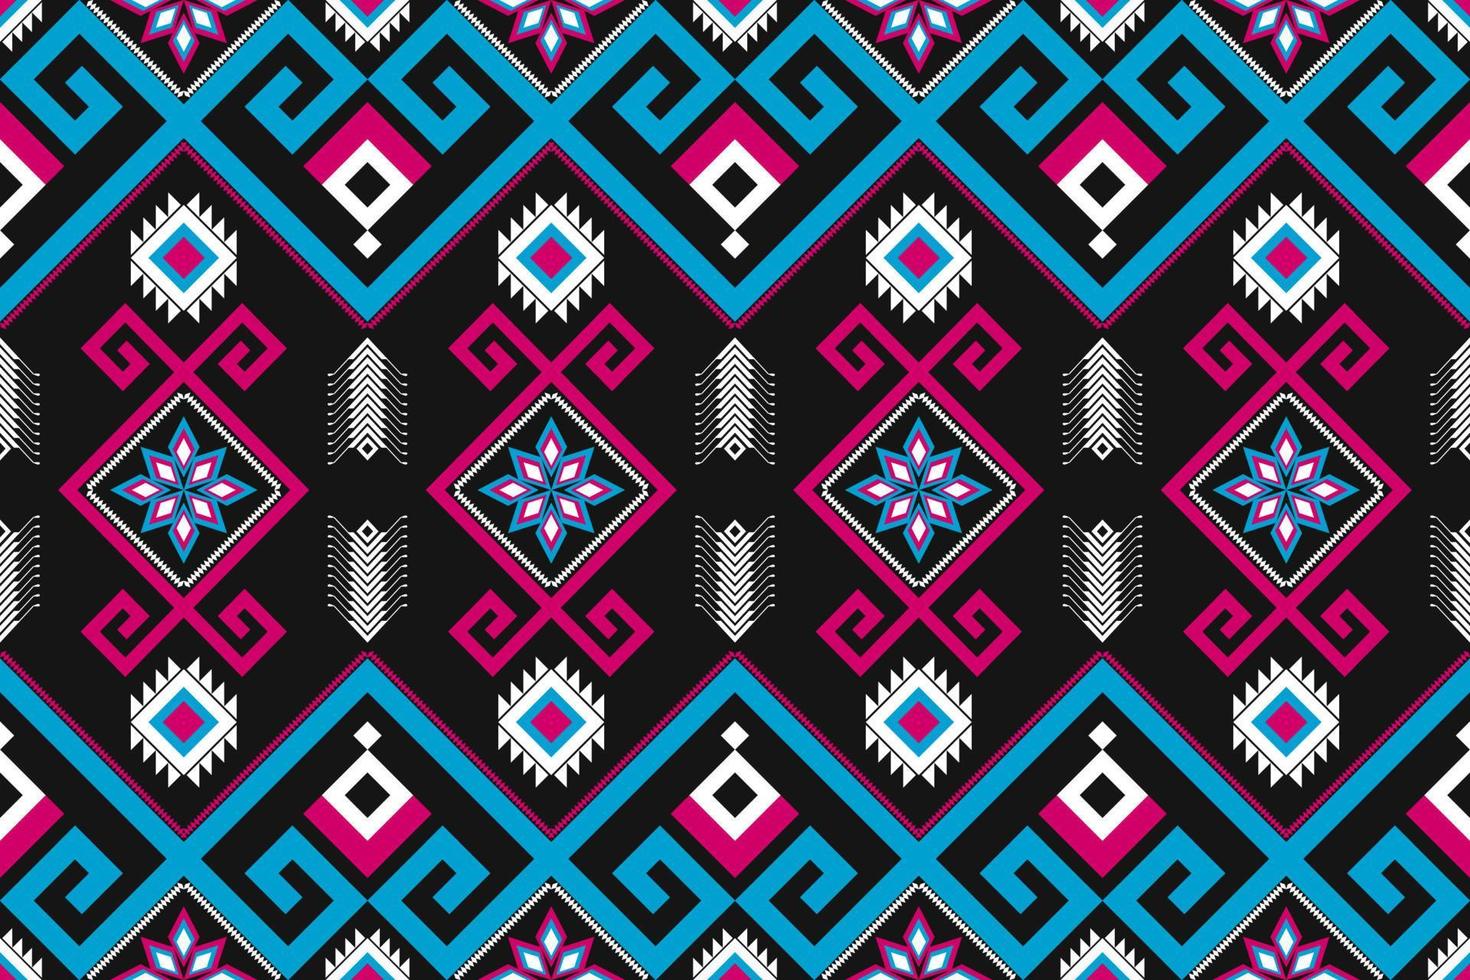 Abstract ethnic pattern art. Seamless pattern in tribal, folk embroidery, and Mexican style. Geometric striped. Design for background, wallpaper, vector illustration, fabric, clothing, carpet.